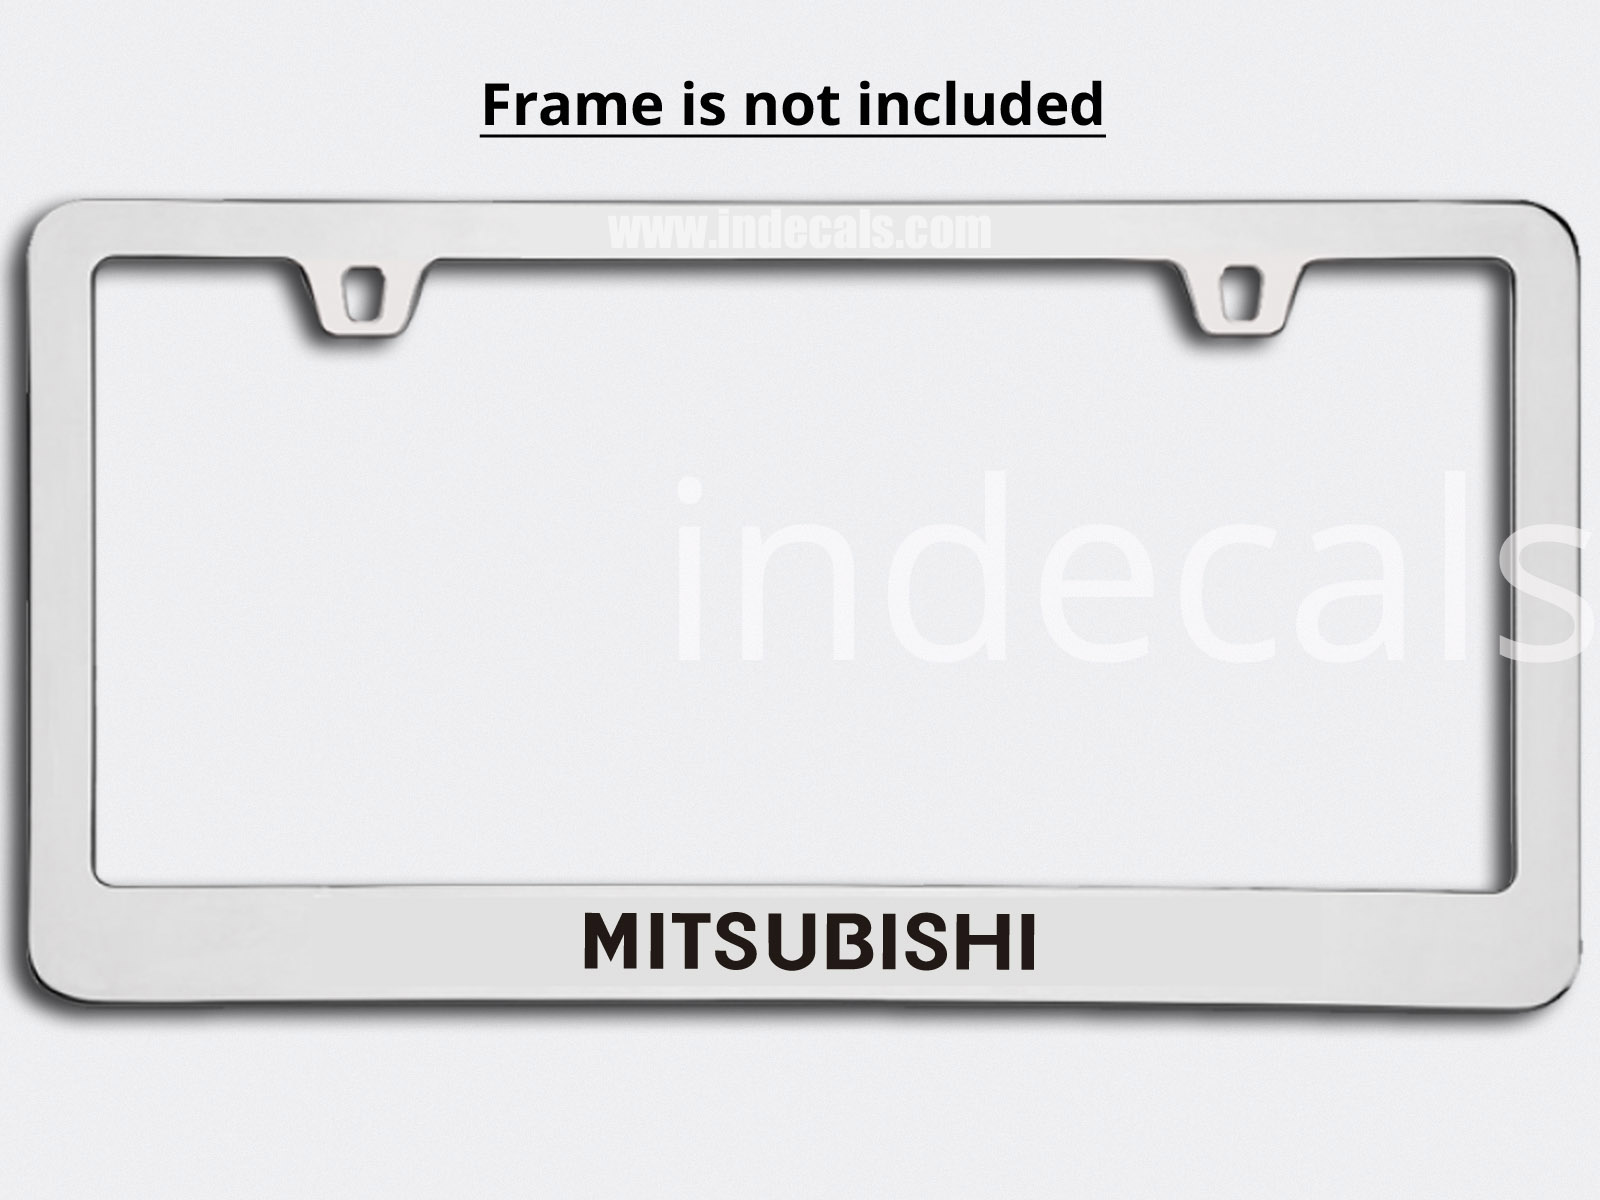 3 x Mitsubishi Stickers for Plate Frame - Black